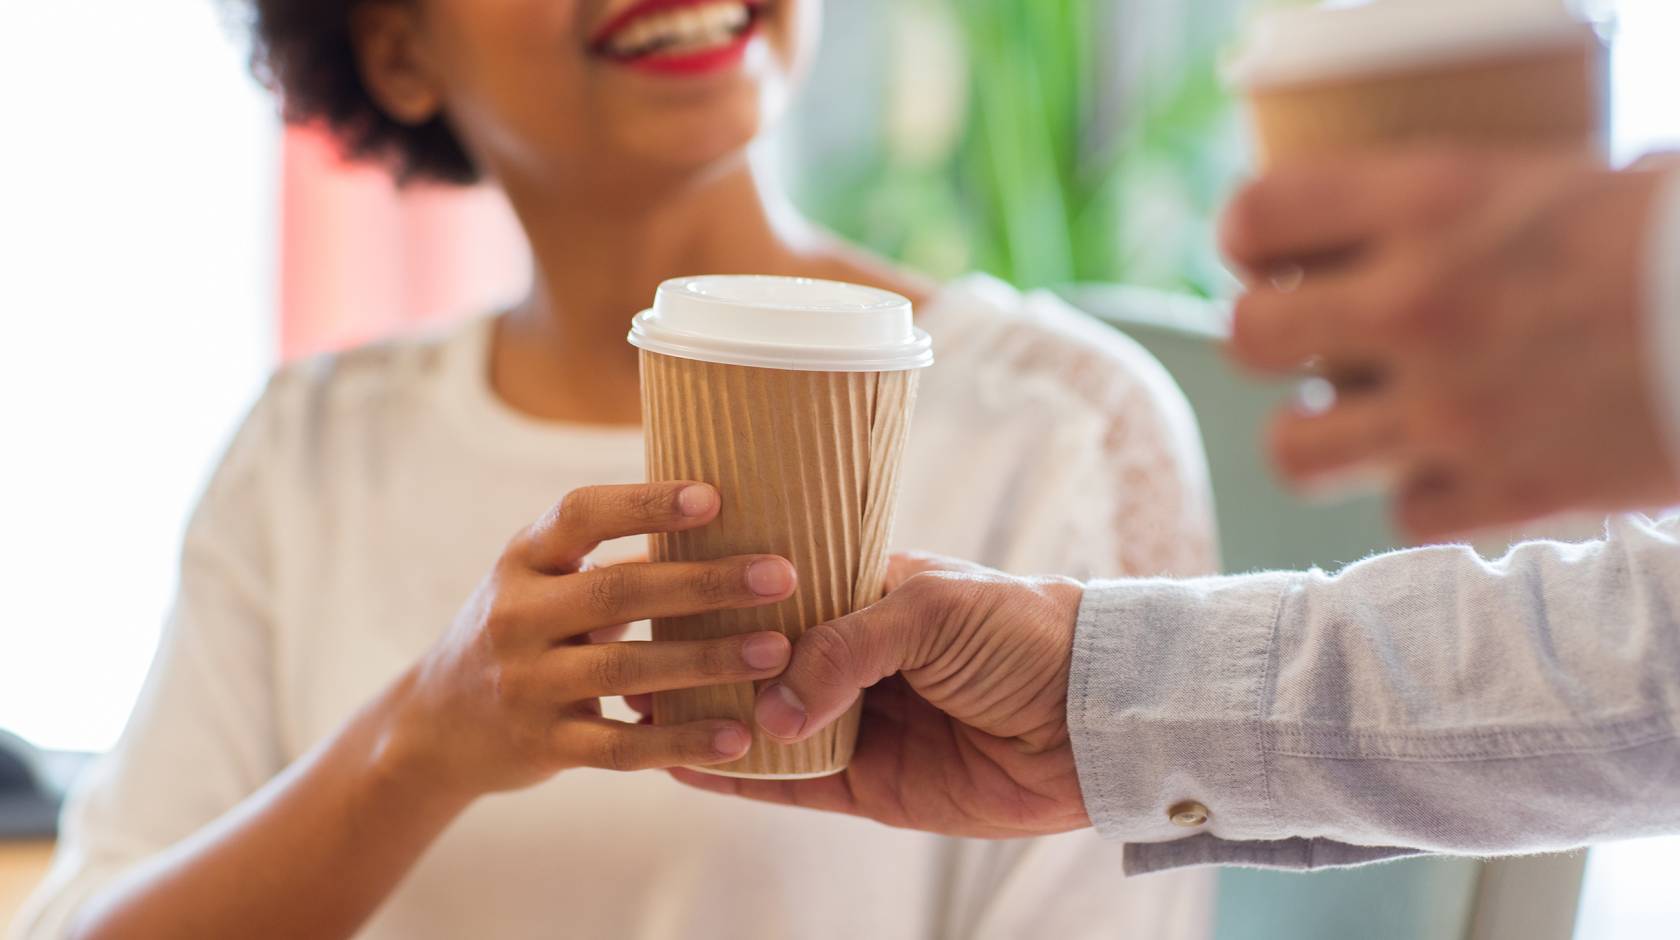 A person hands a smiling Black woman a to go cup of coffee